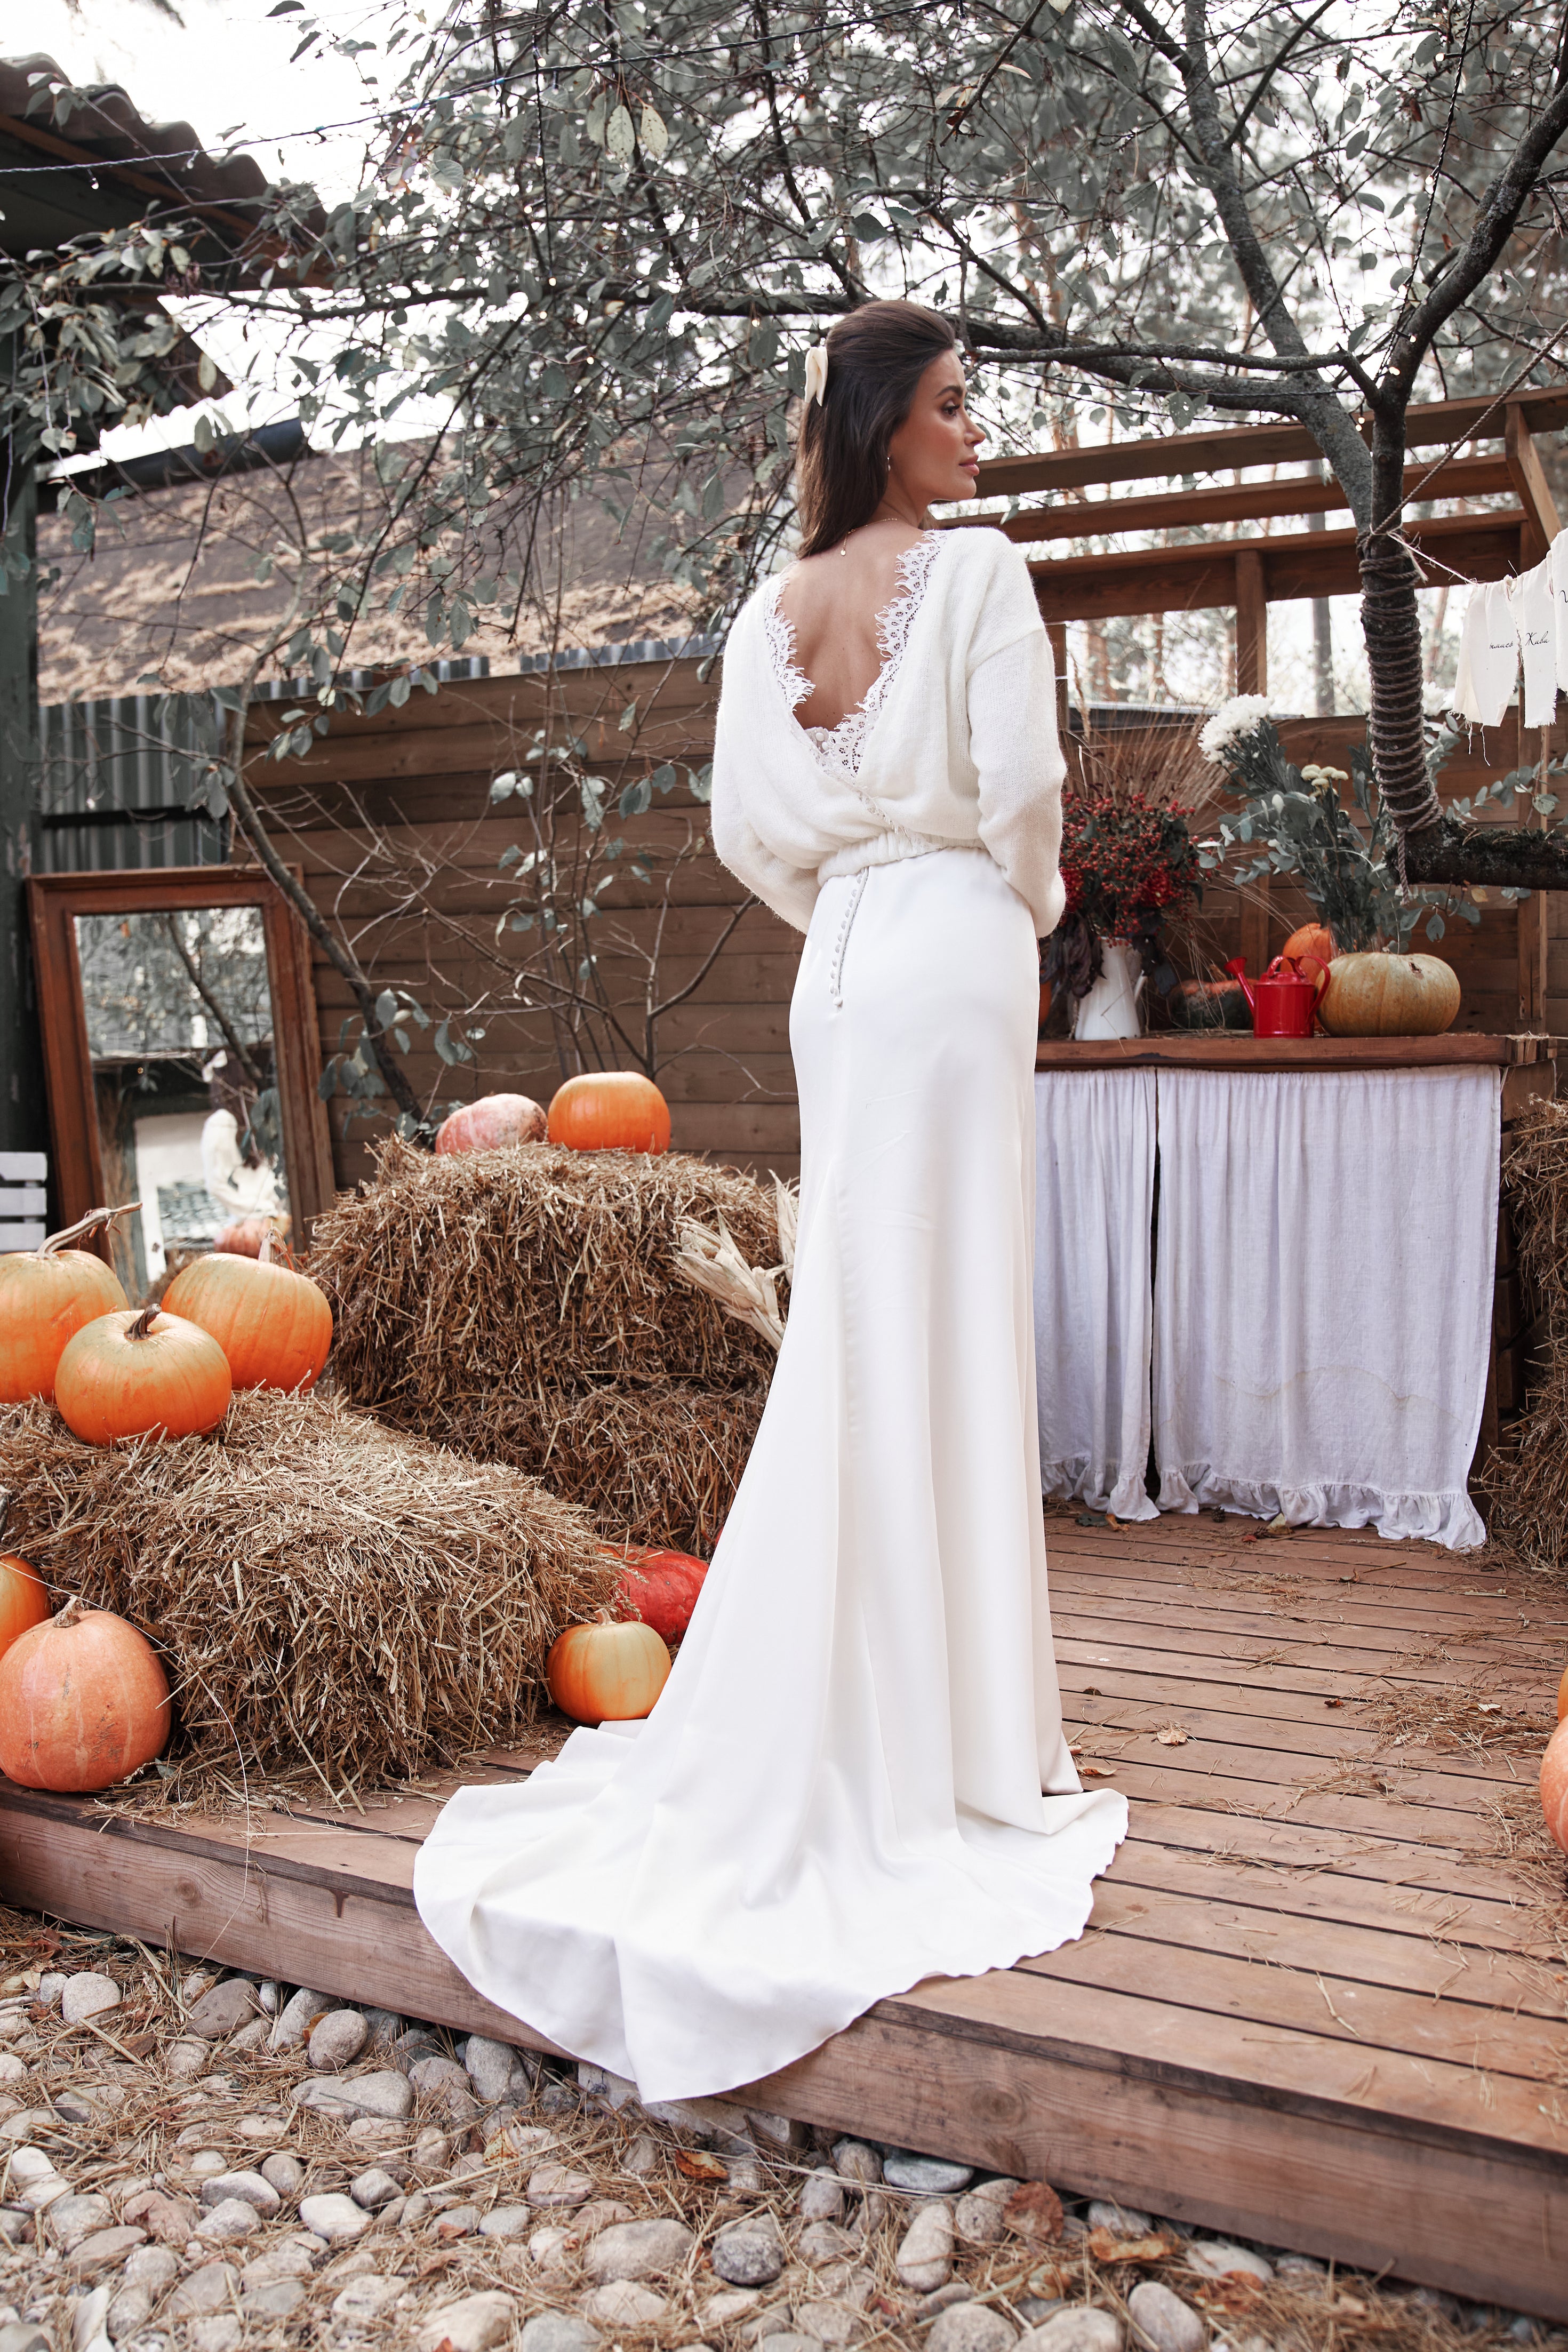 Wedding knitted sweater with deep V-cut and lace decoration.